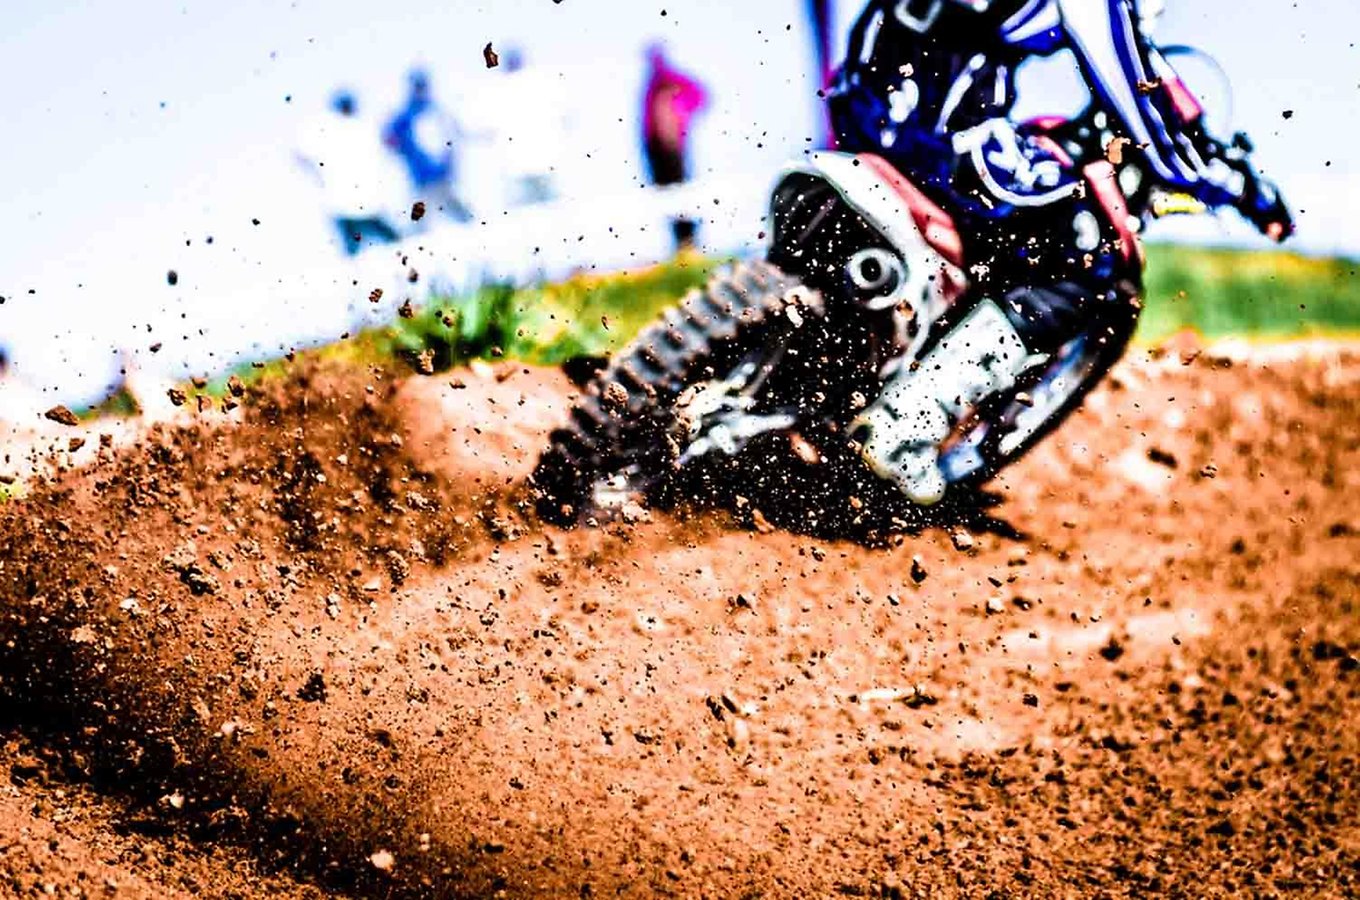 Motocross Wallpaper - Android Apps and Tests - AndroidPIT